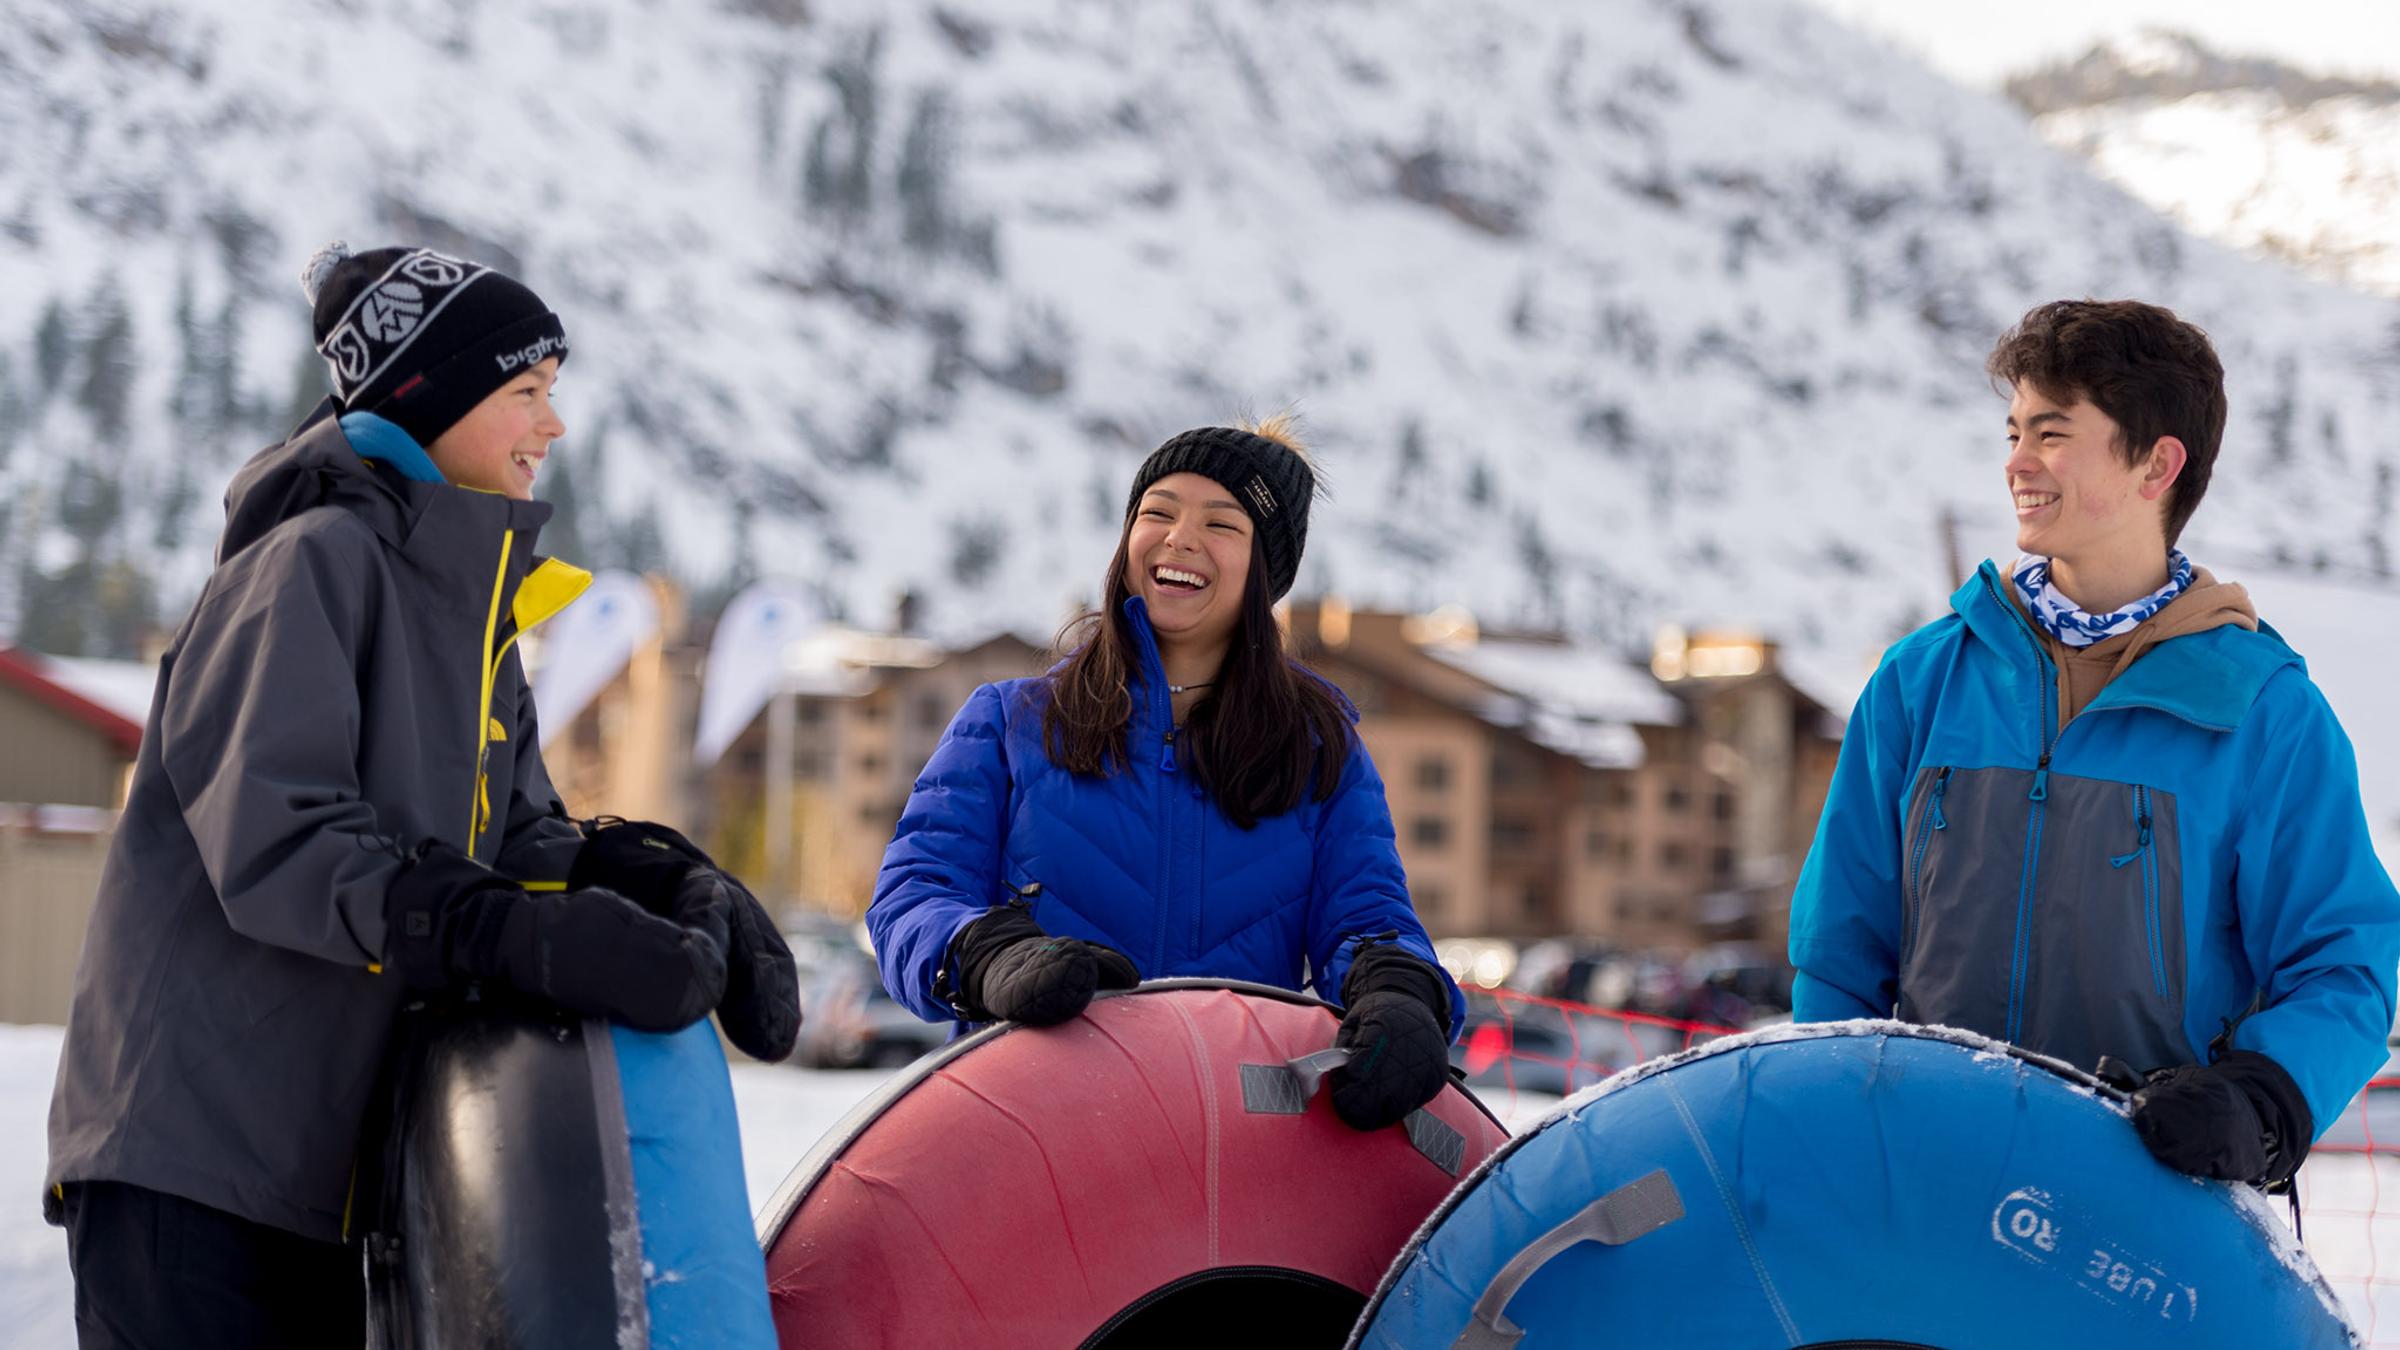 A family Snow Tubing at Squaw Valley with village in the backgroud